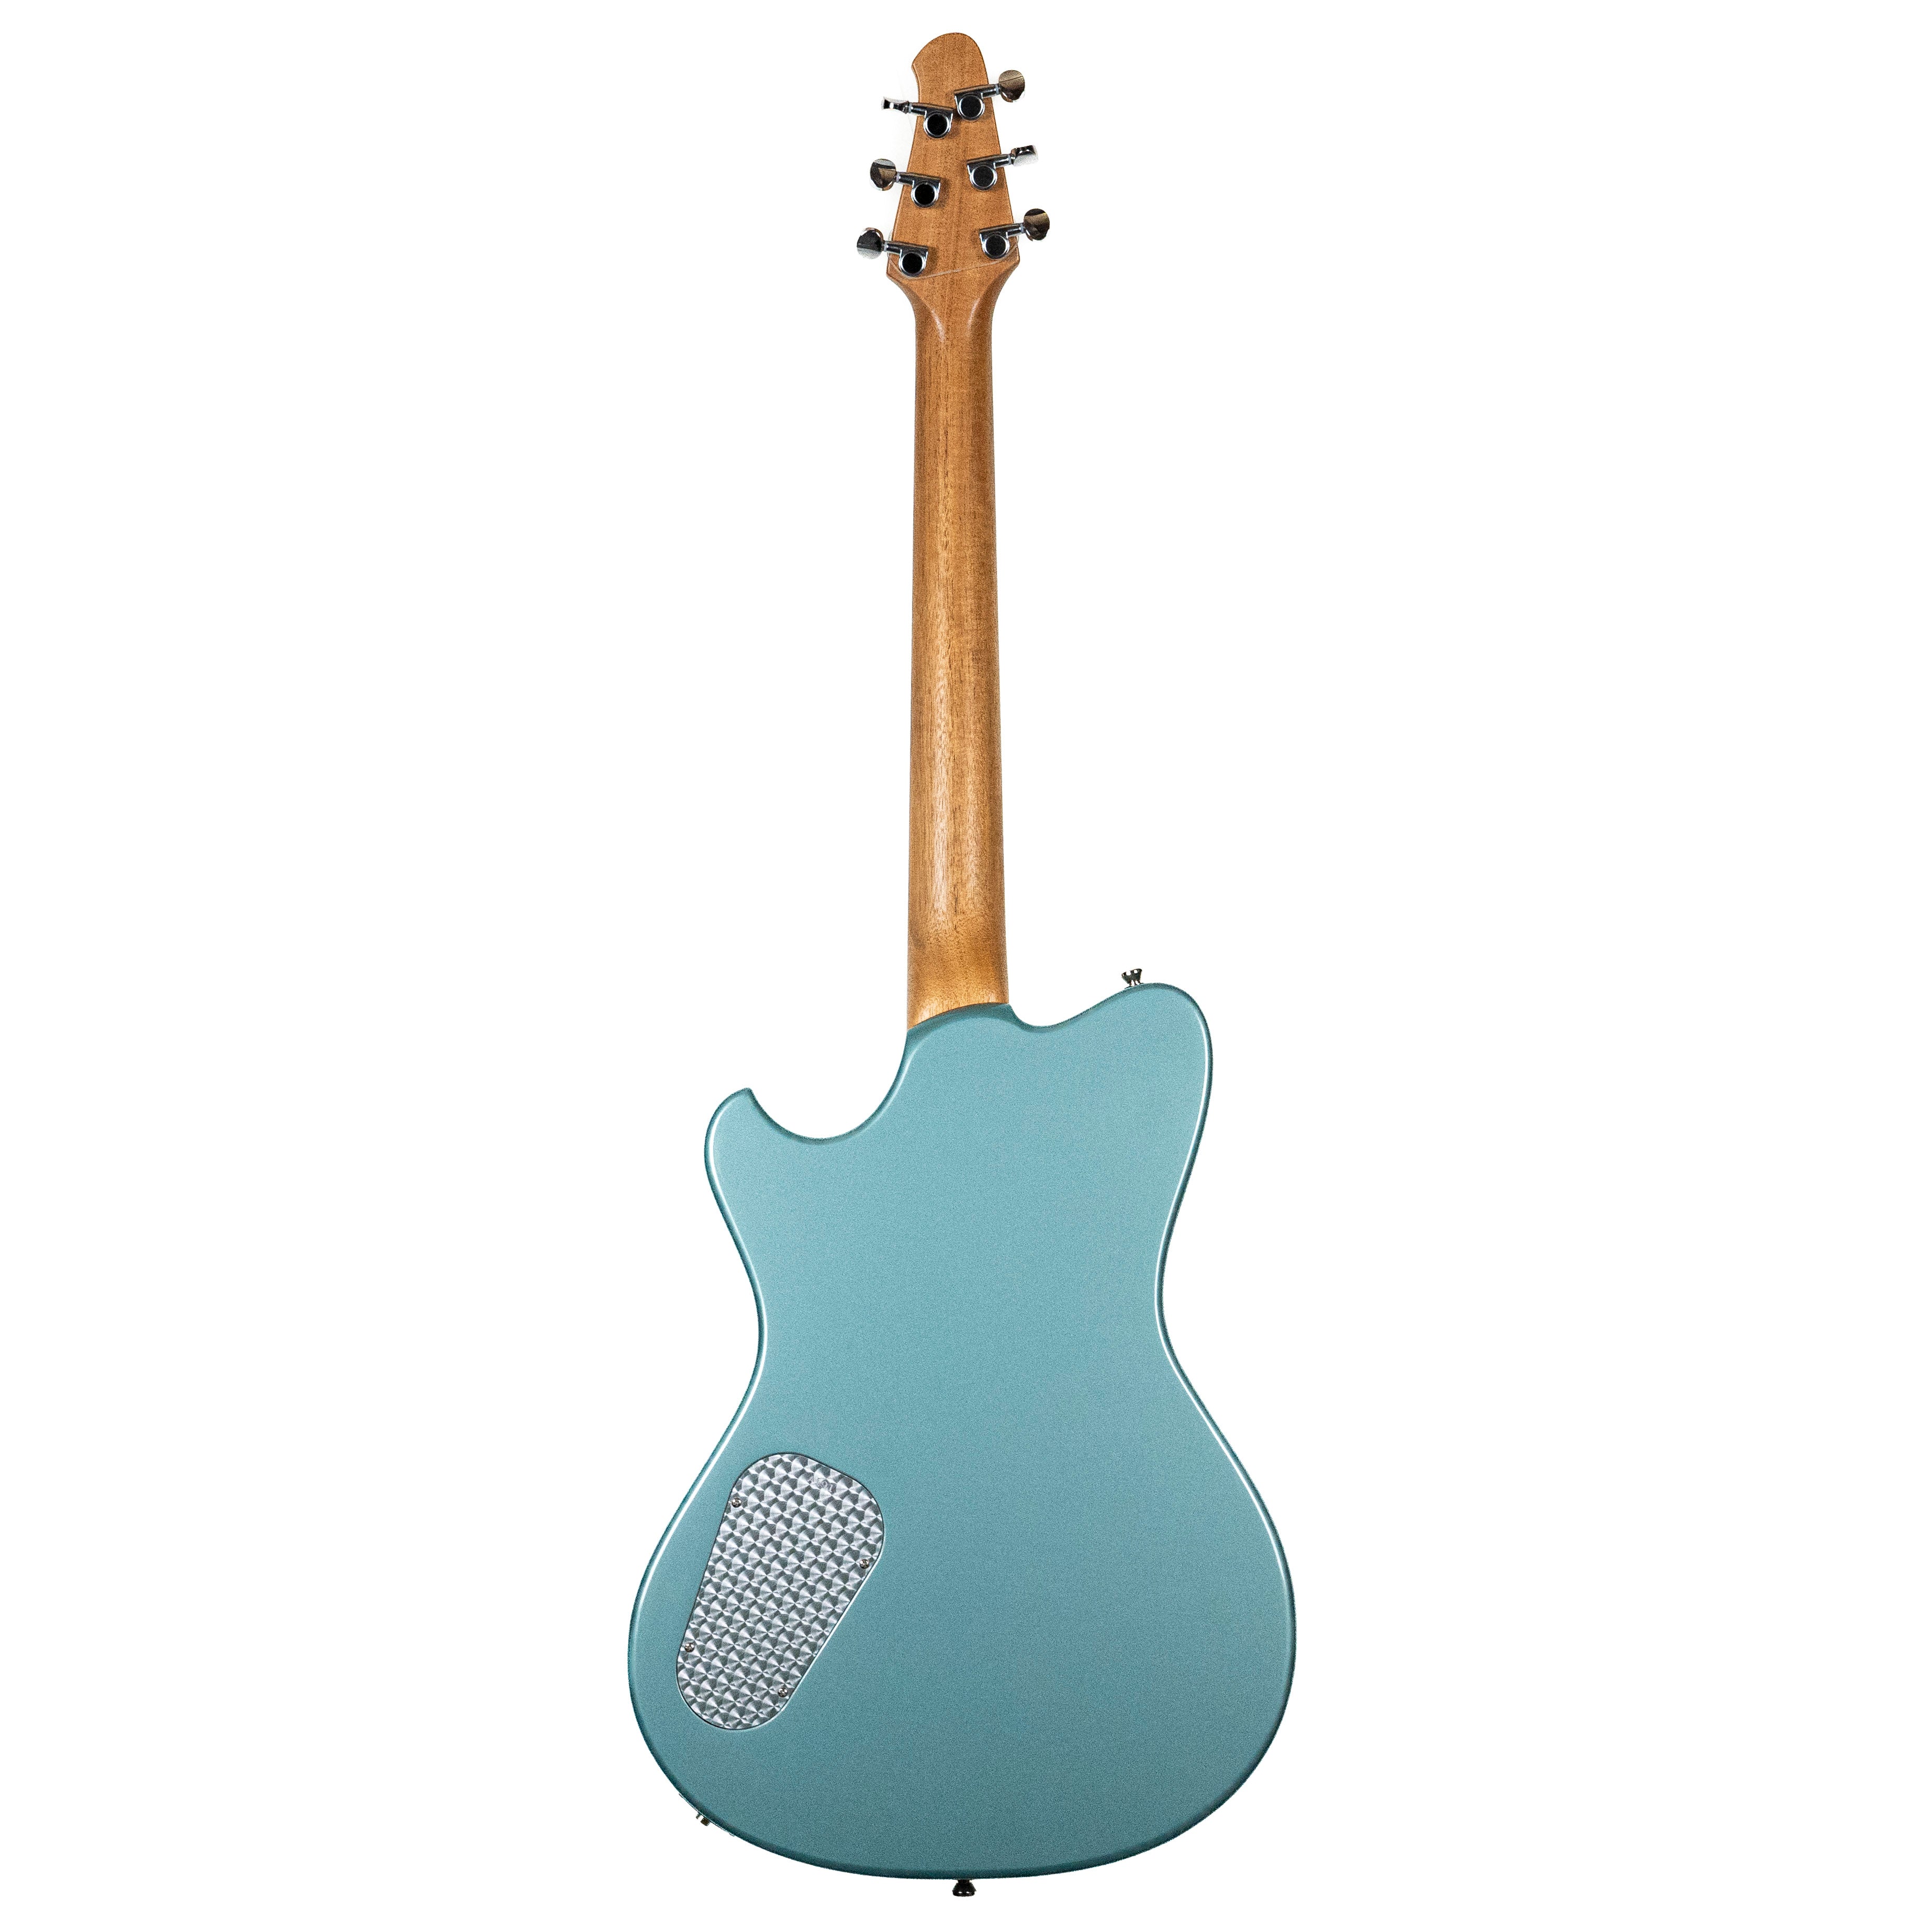 Powers Electric A-Type, Artesian Turquoise